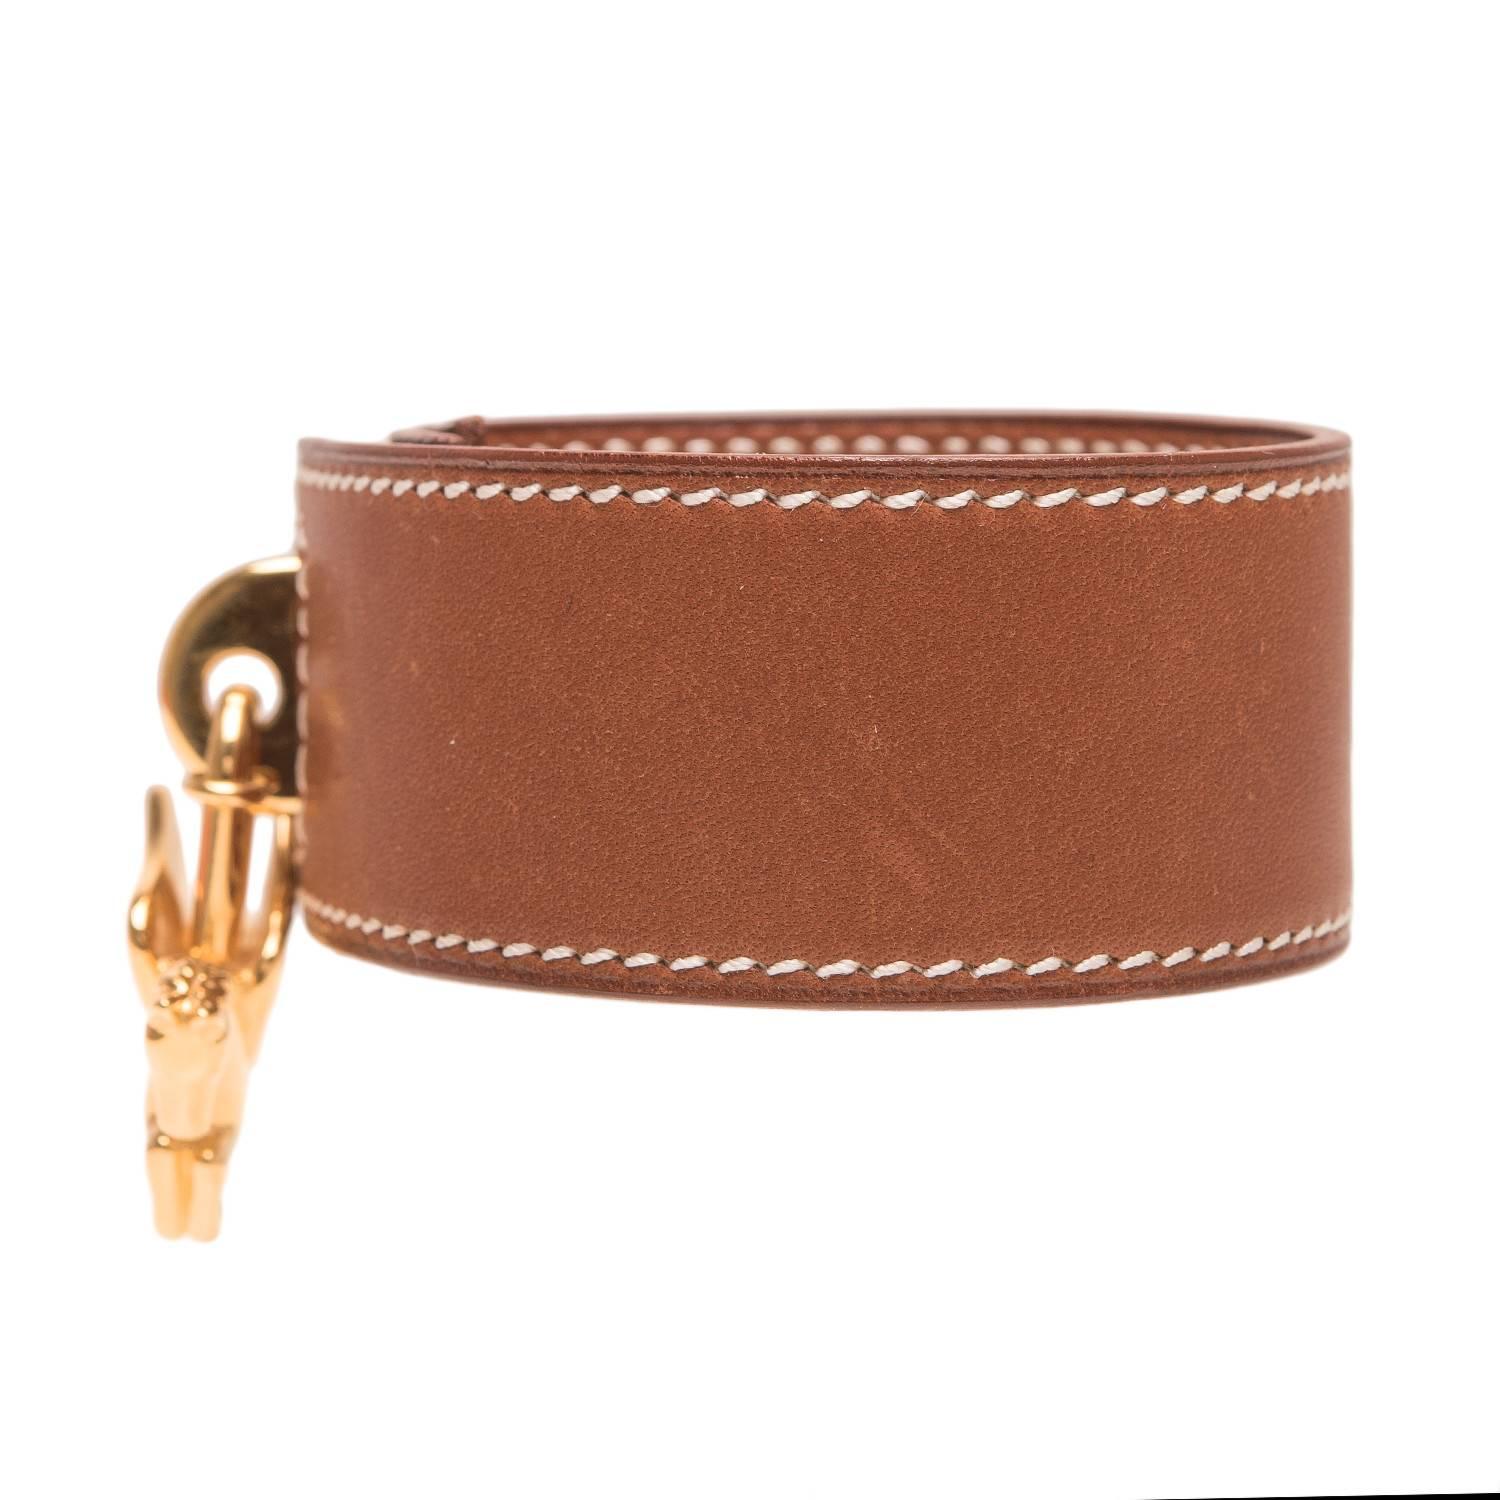 Hermes Barenia leather bracelet with gold pegasus charm.

The bracelet is made of Barenia leather with white contrast stitching and gold plated hardware.

Origin: France

Condition: Pristine; never worn however does show marks from